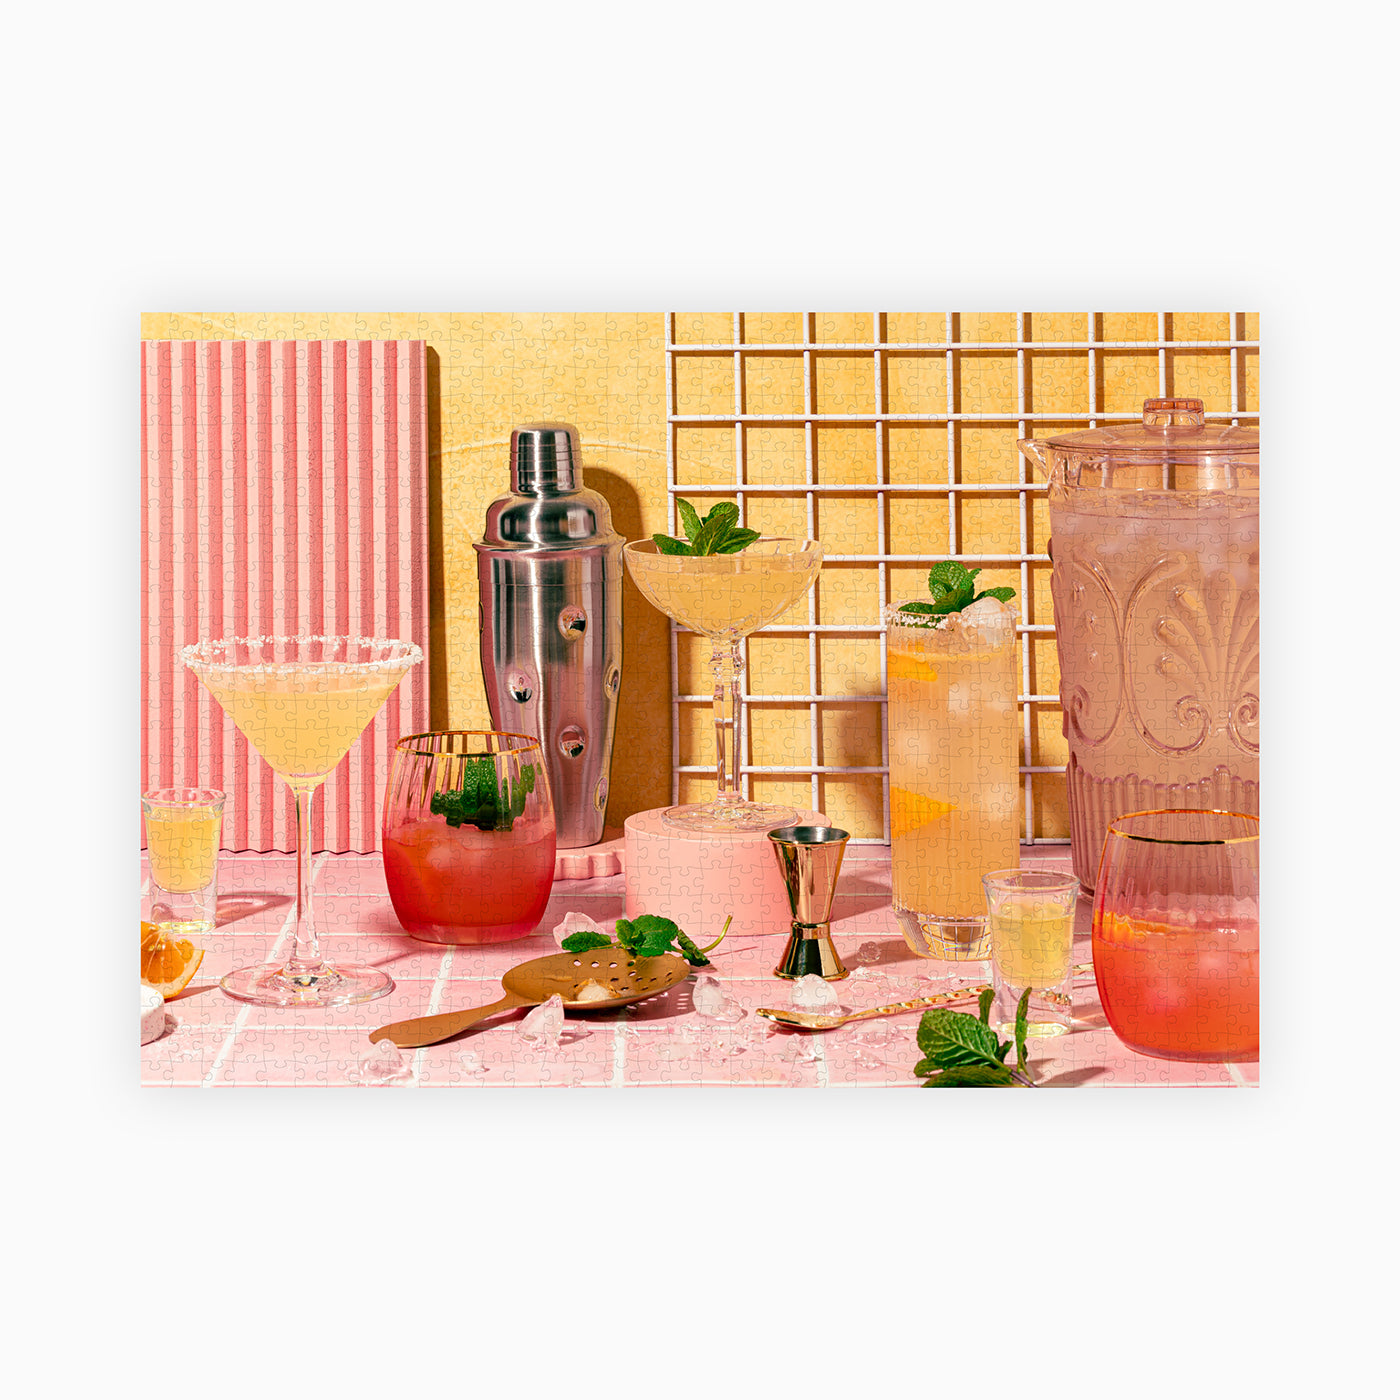 Summer puzzle cocktail artwork by New Zealand artist